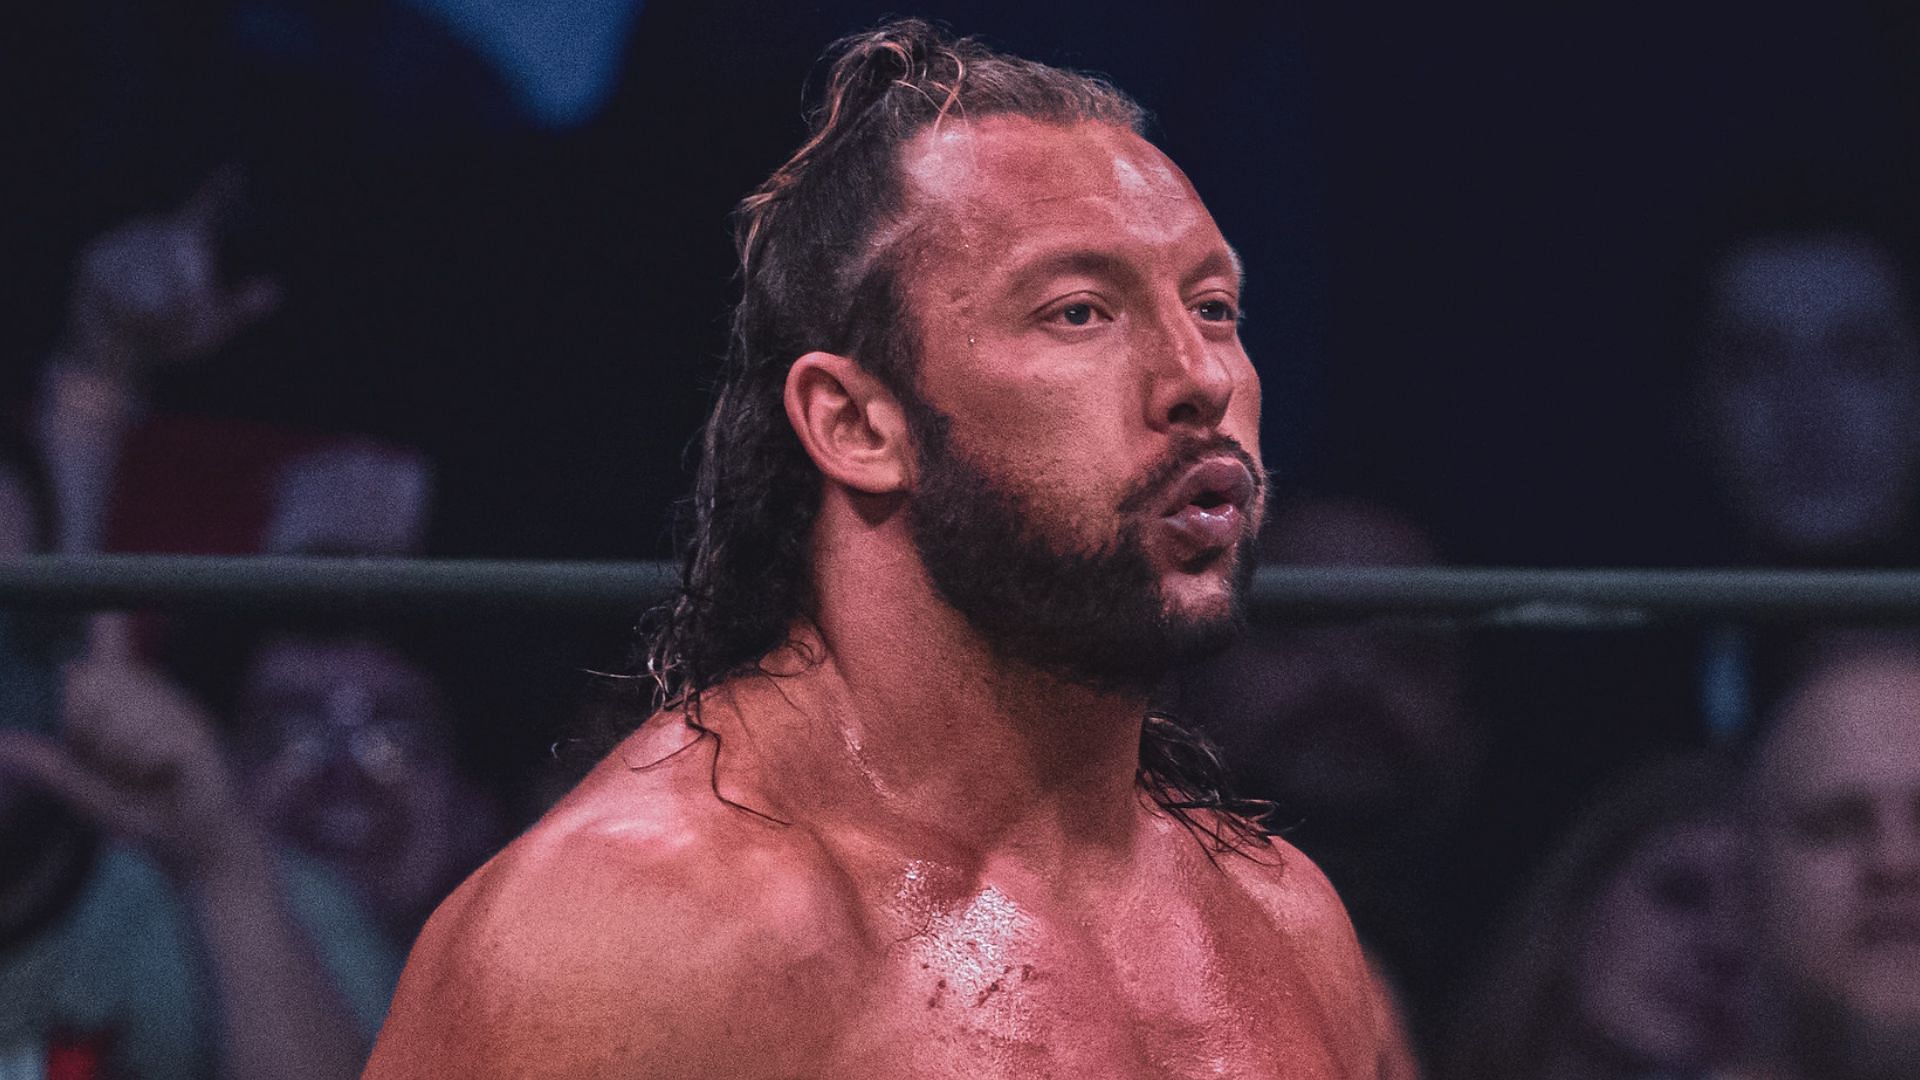 Kenny Omega at AEW All Out 2022 (credit: Jay Lee Photography)